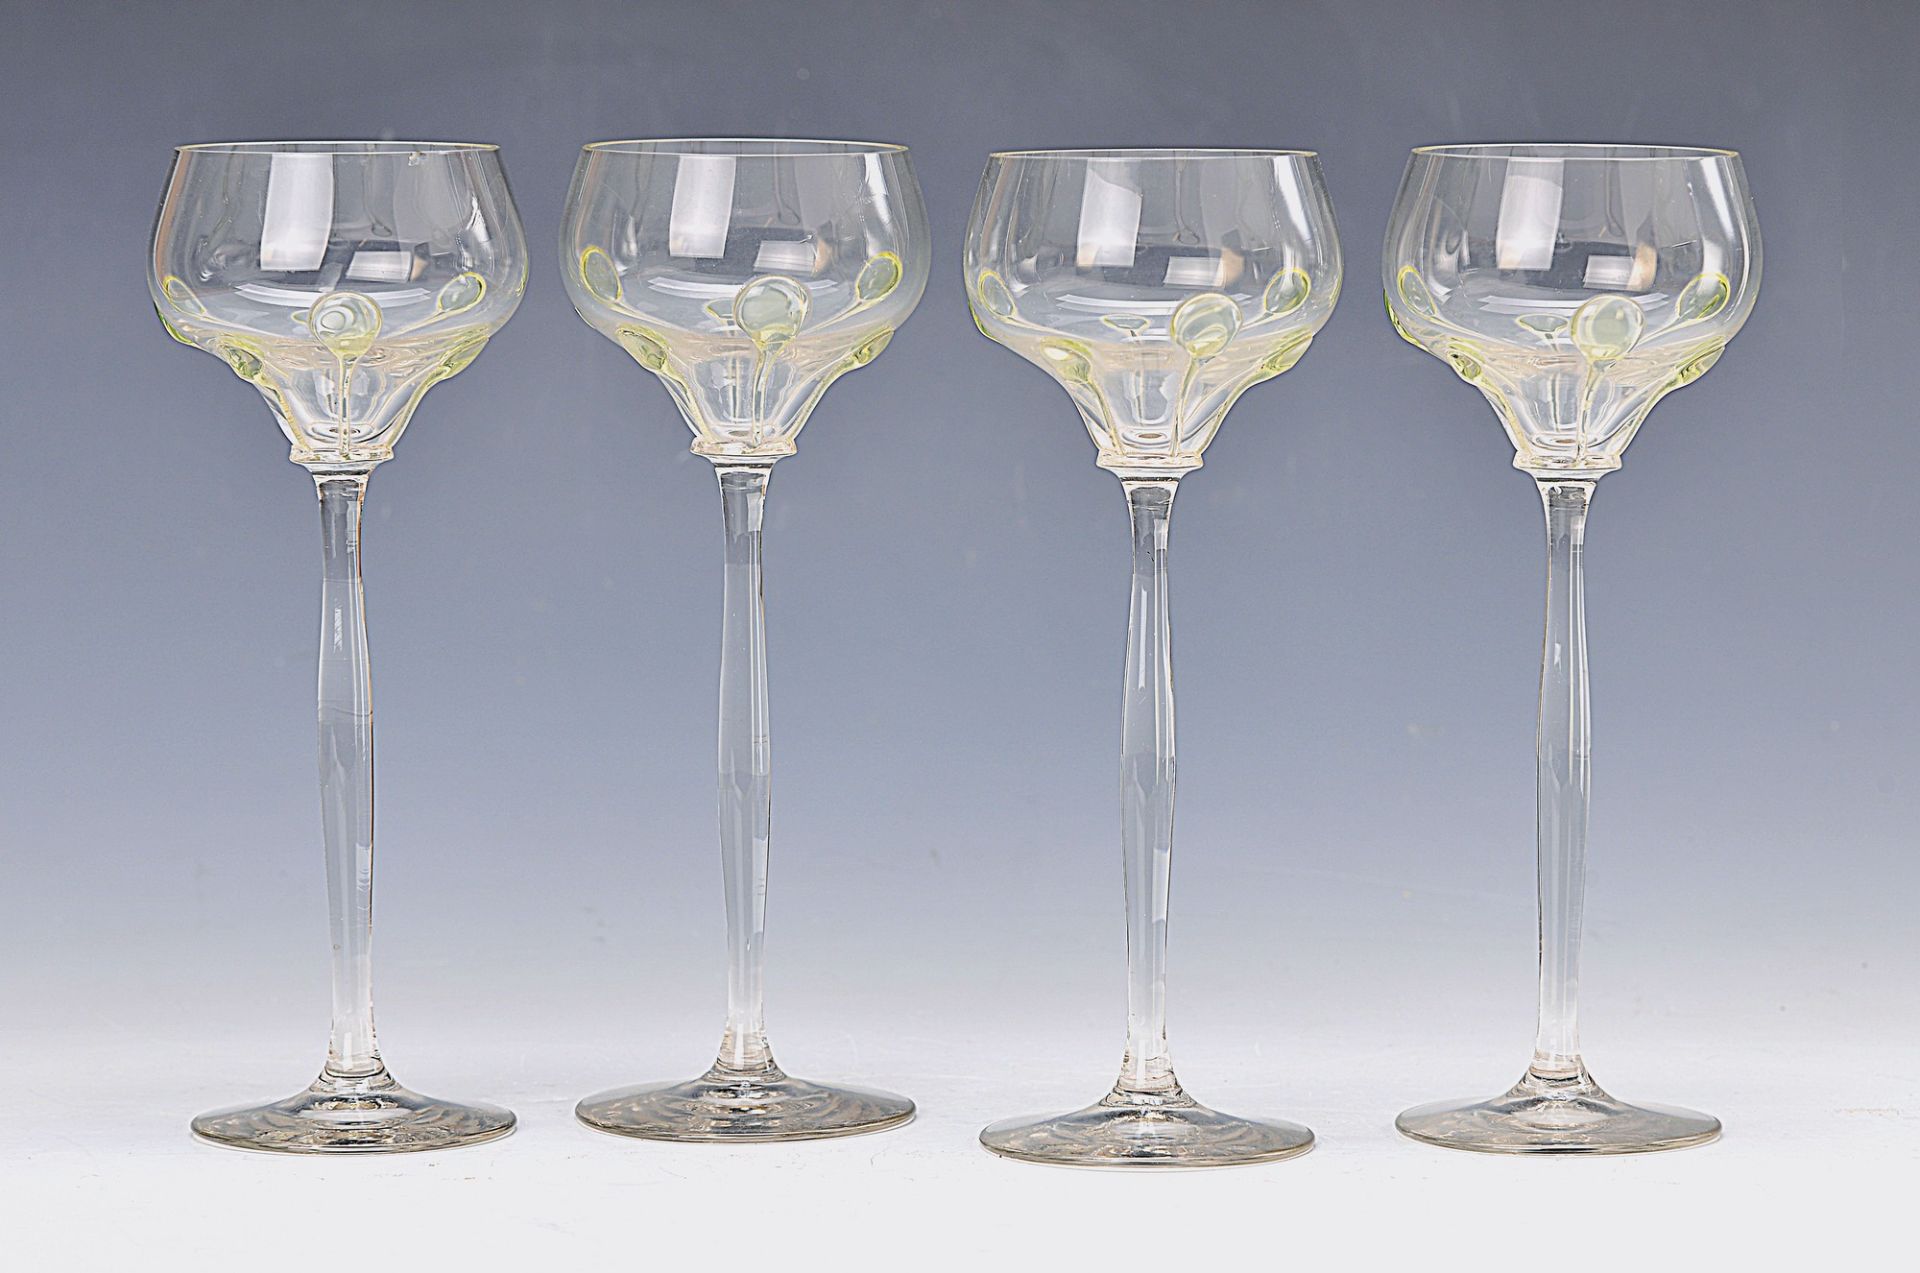 7 Art Nouveau glasses, around 1910, colorless glass with green naps, H.approx. 21 cm, 2x minor on